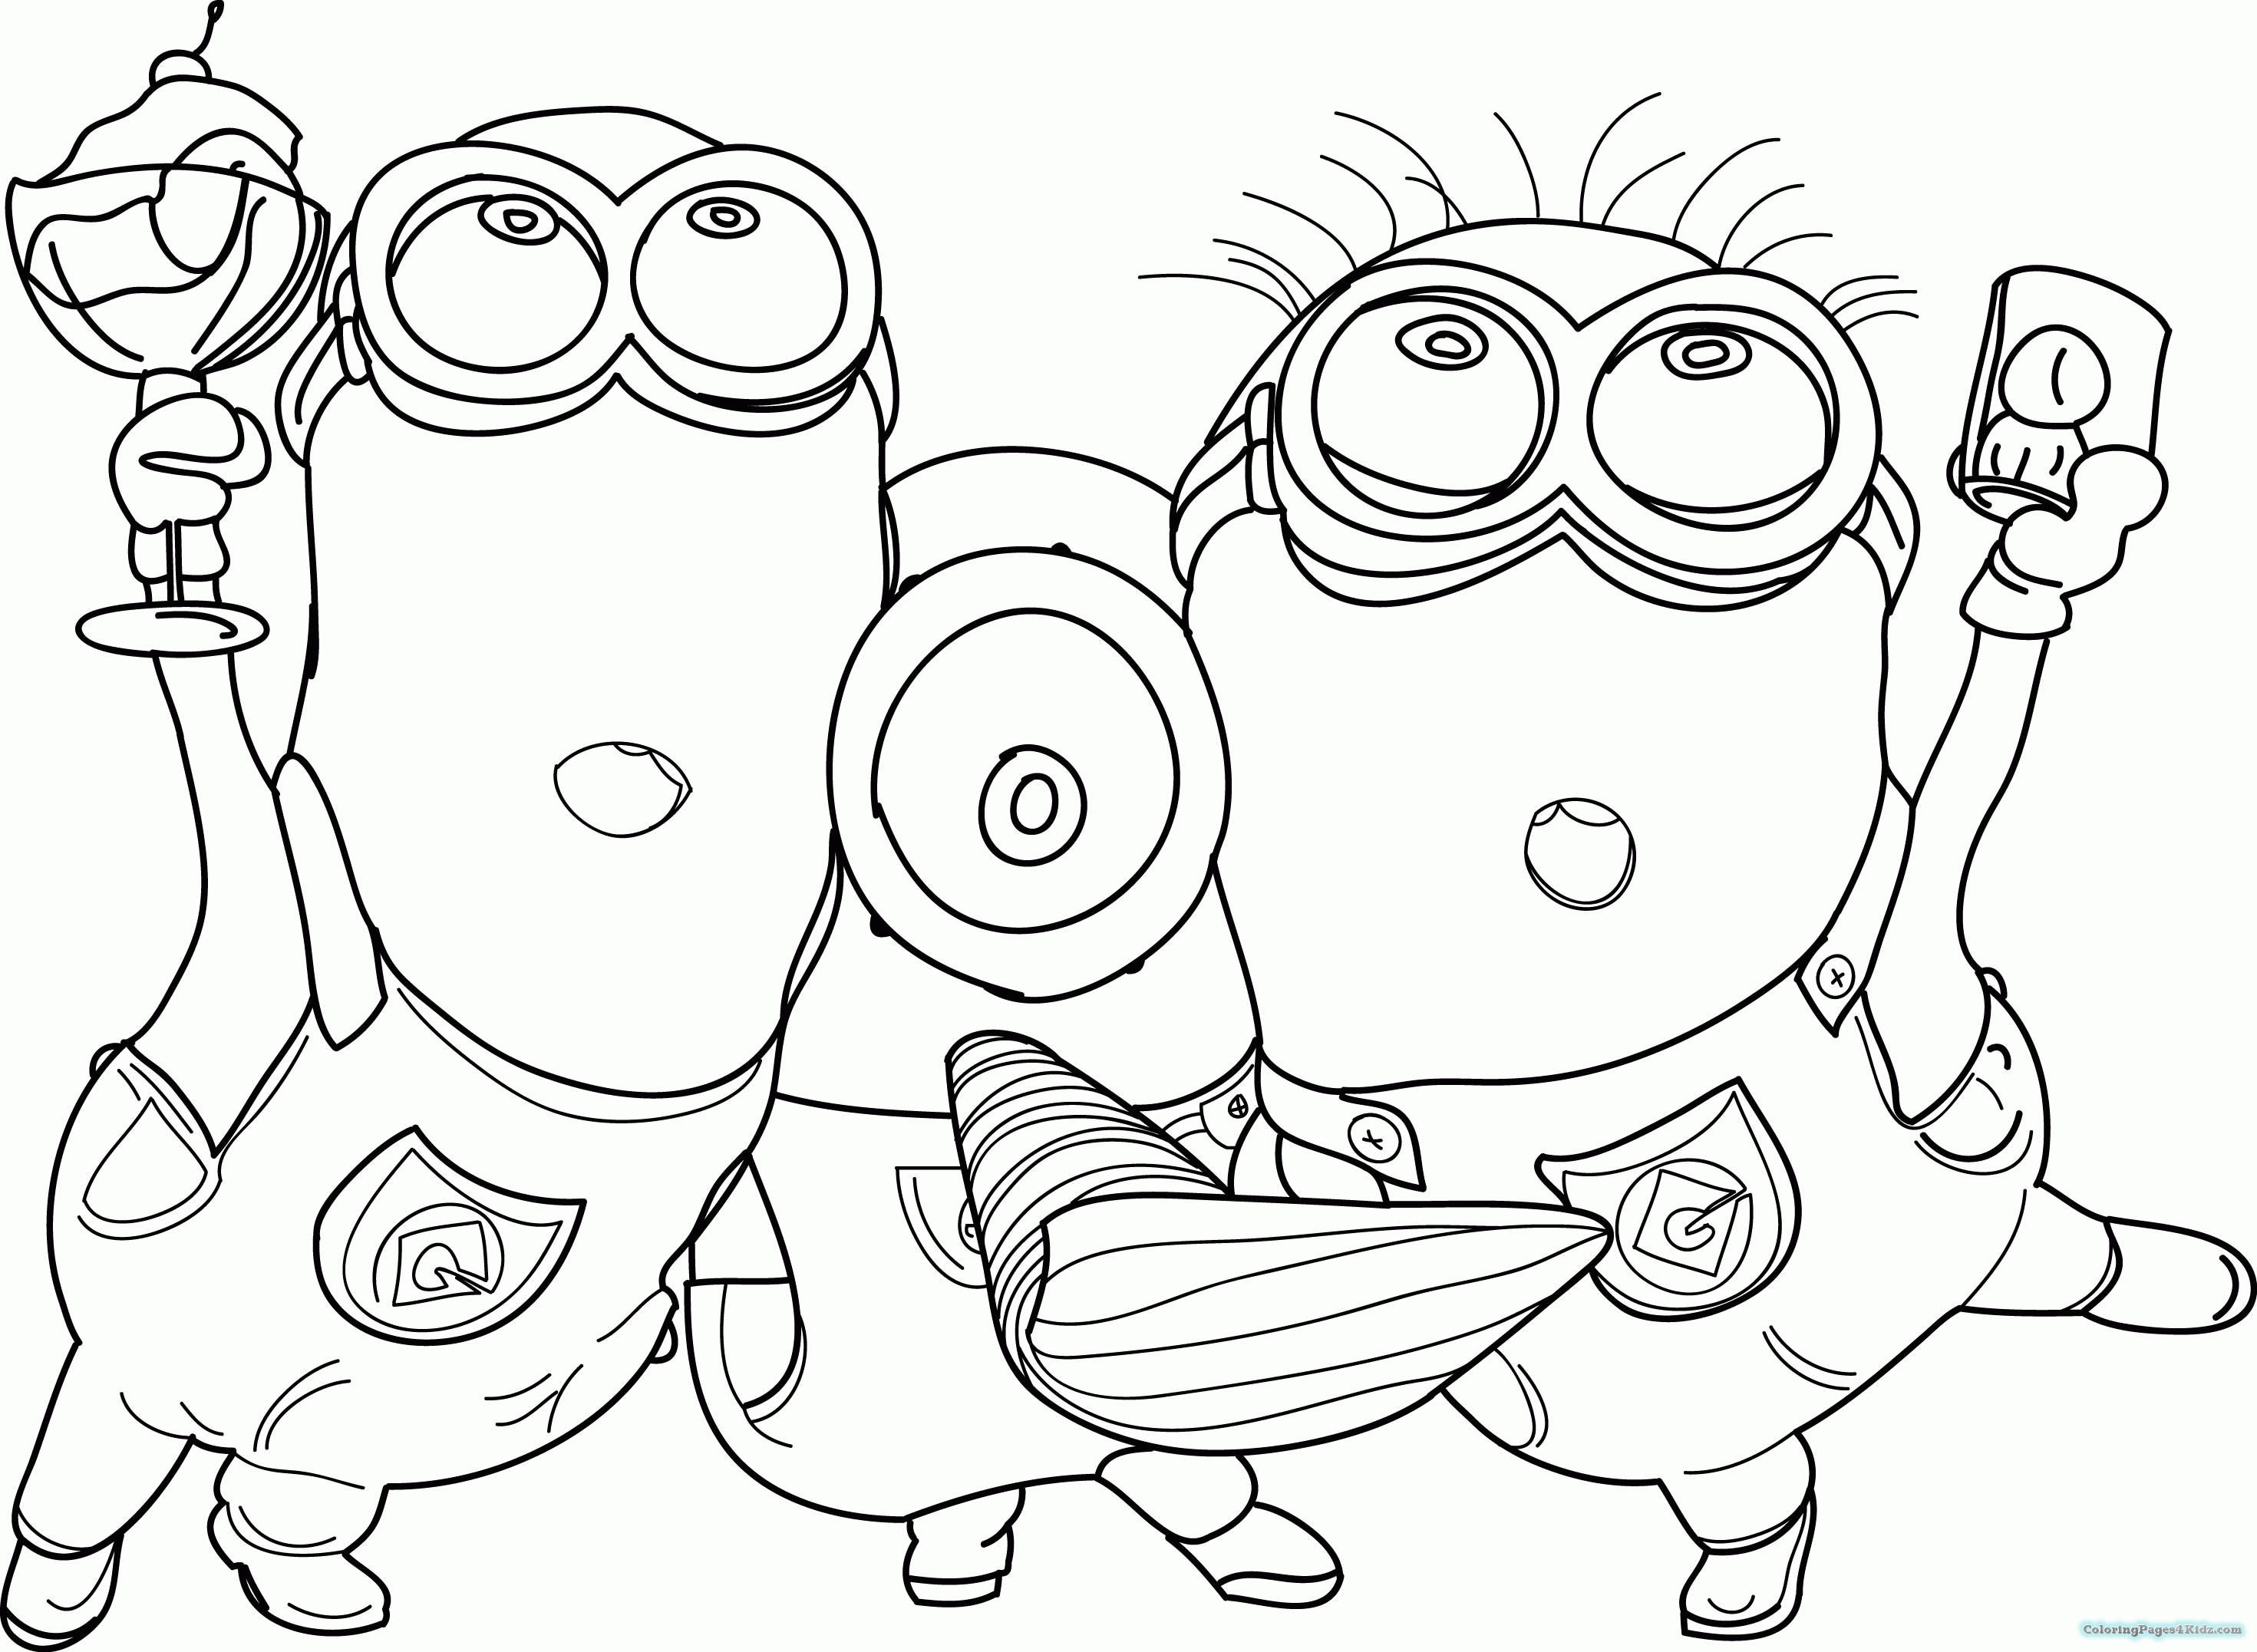 minions coloring coloring pages minions fireman coloring pages for kids minions coloring 